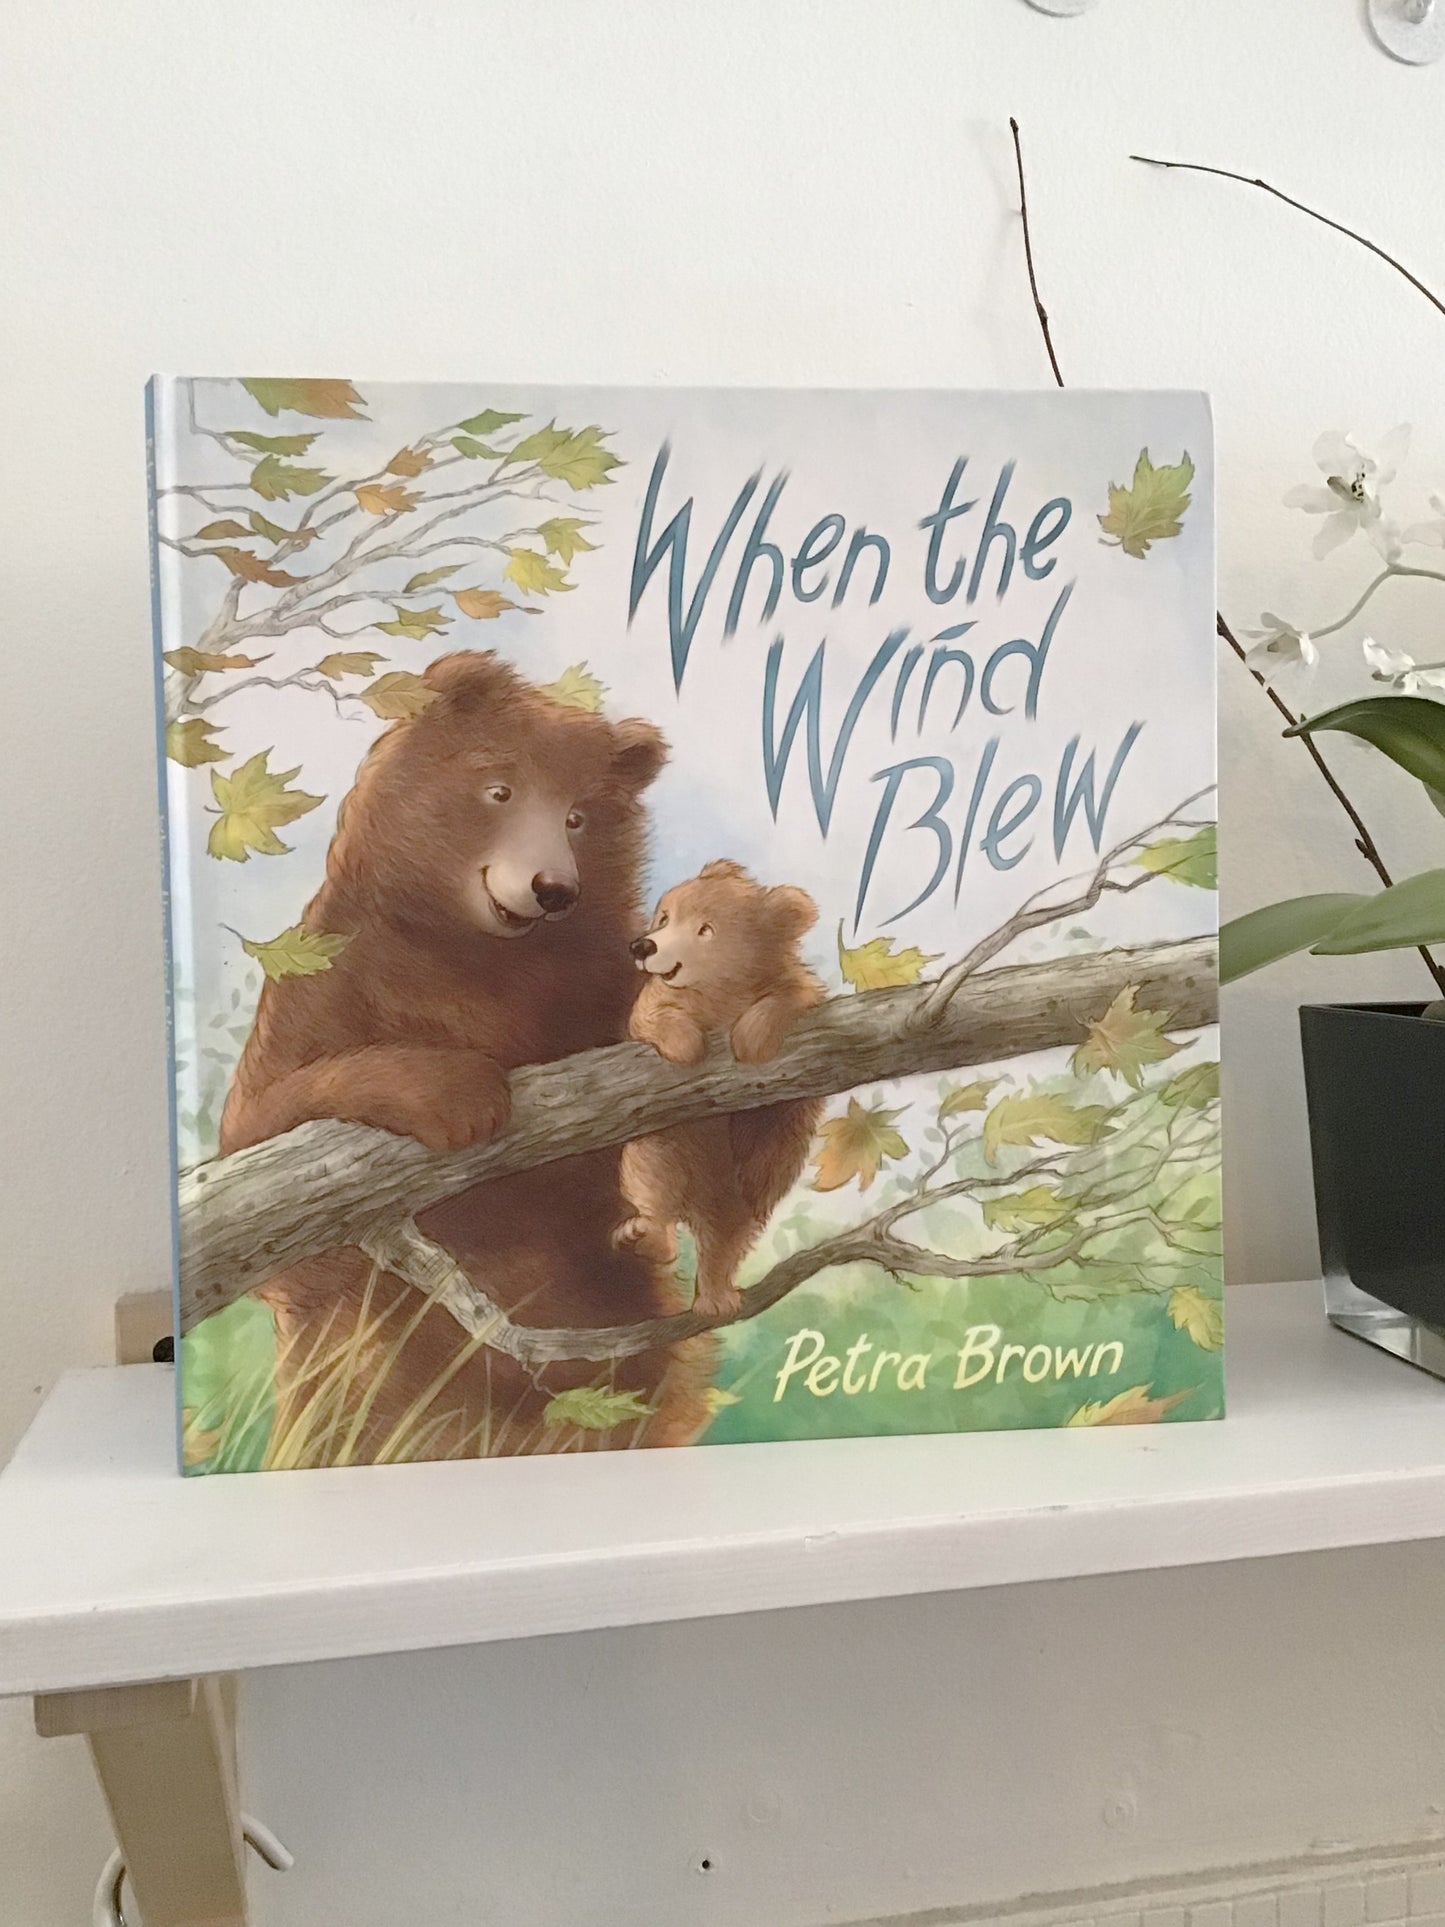 When the Wind Blew by Petra Brown